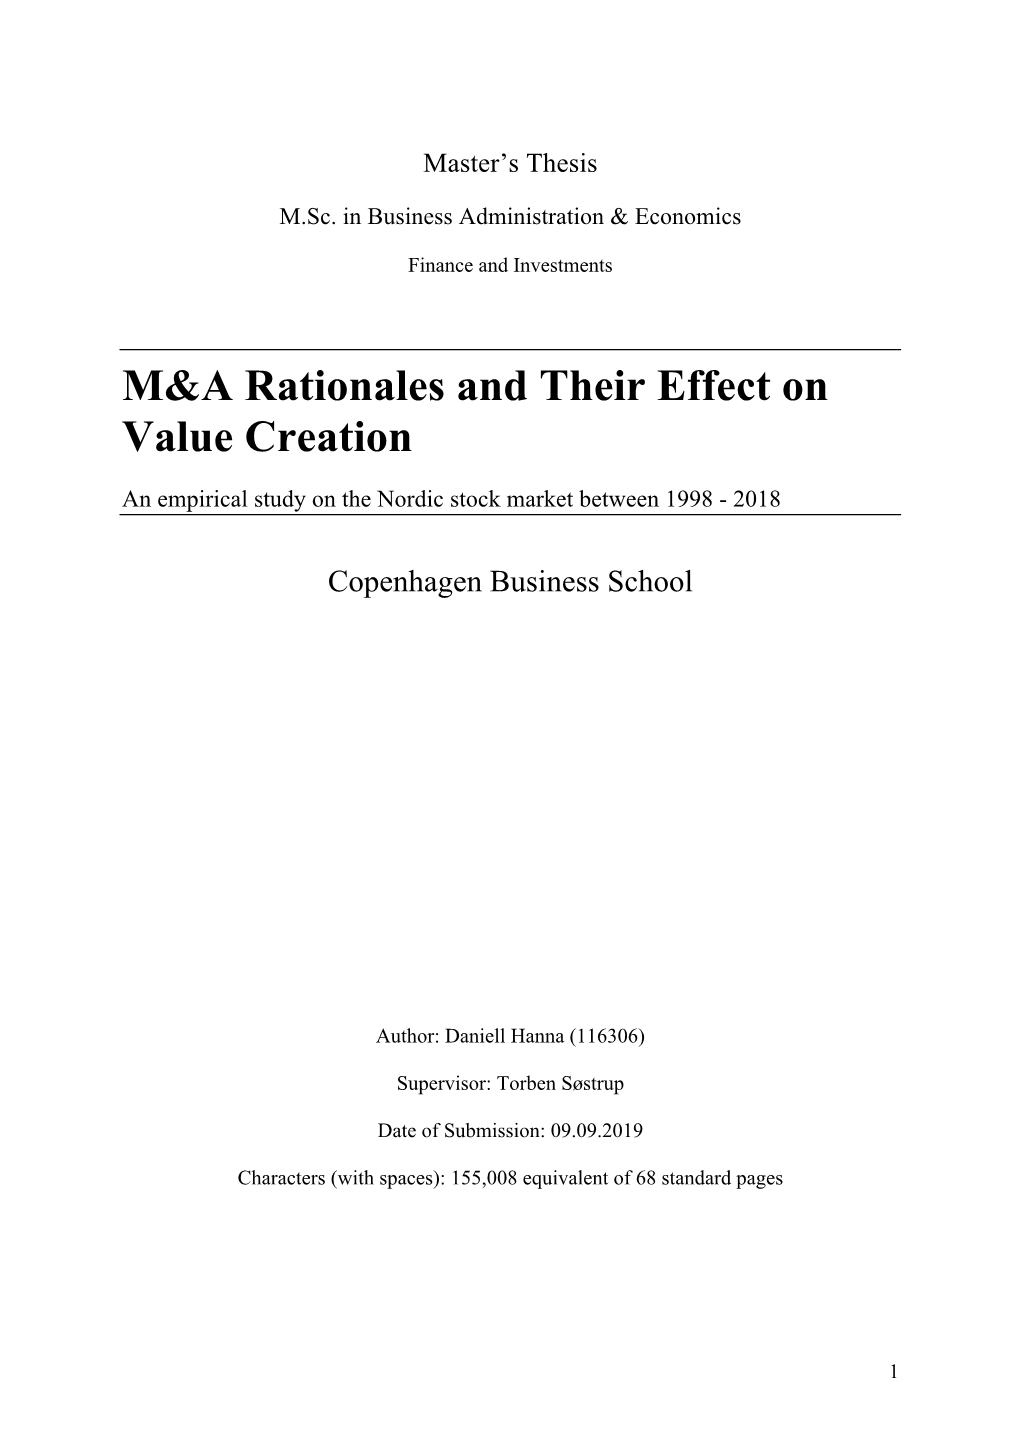 M&A Rationales and Their Effect on Value Creation